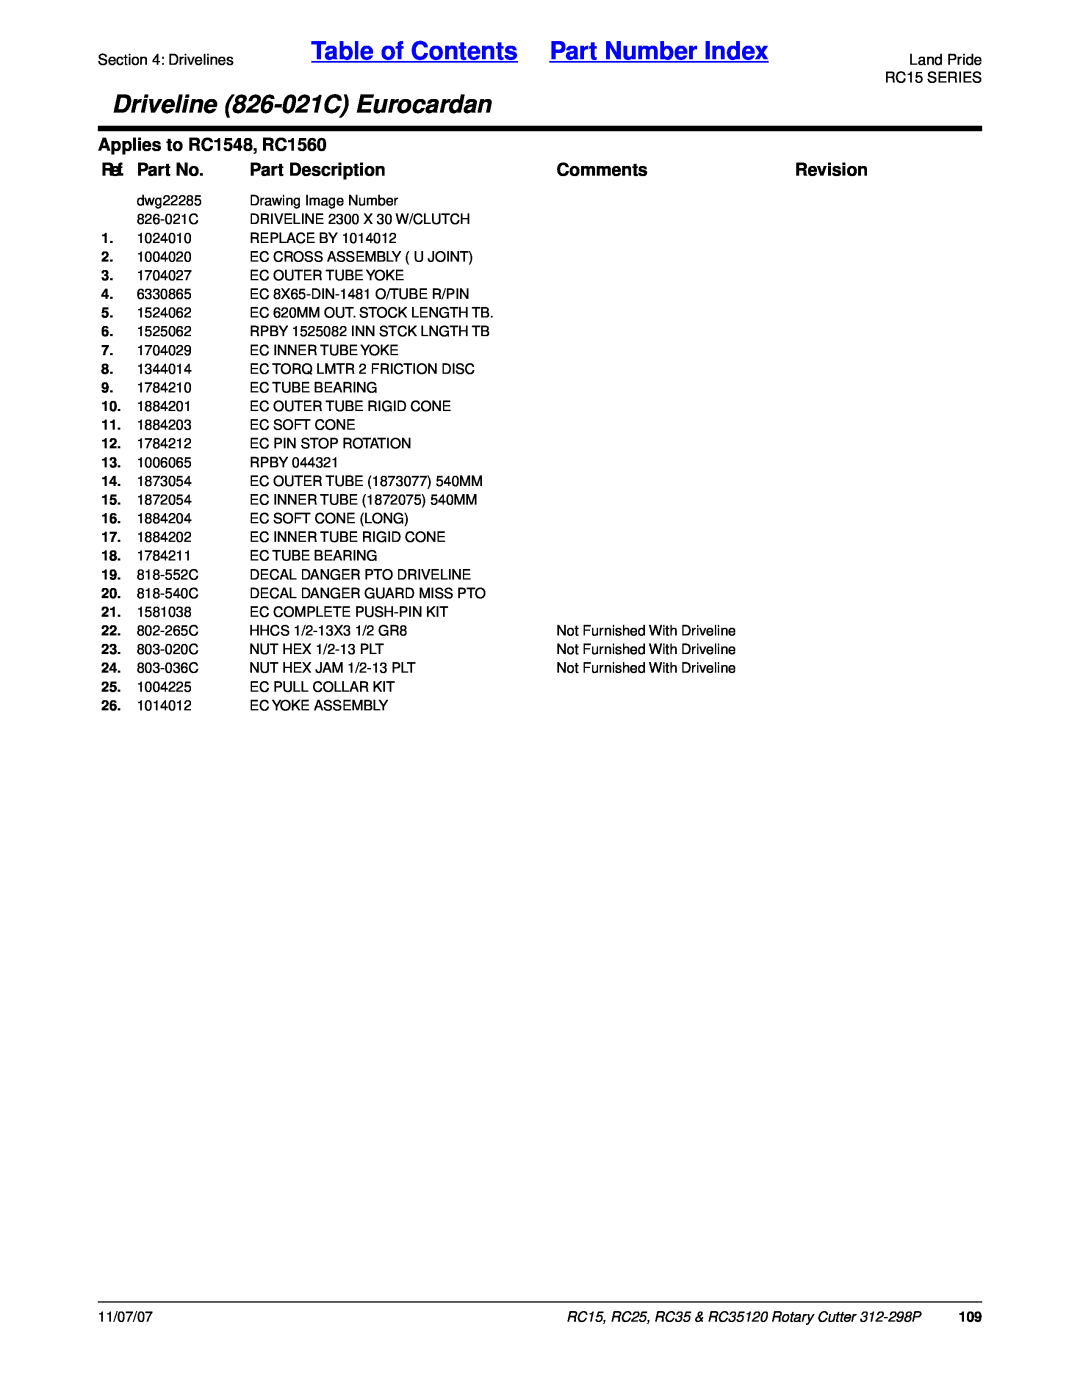 Land Pride RC35 Table of Contents Part Number Index, Driveline 826-021CEurocardan, Applies to RC1548, RC1560, Ref. Part No 